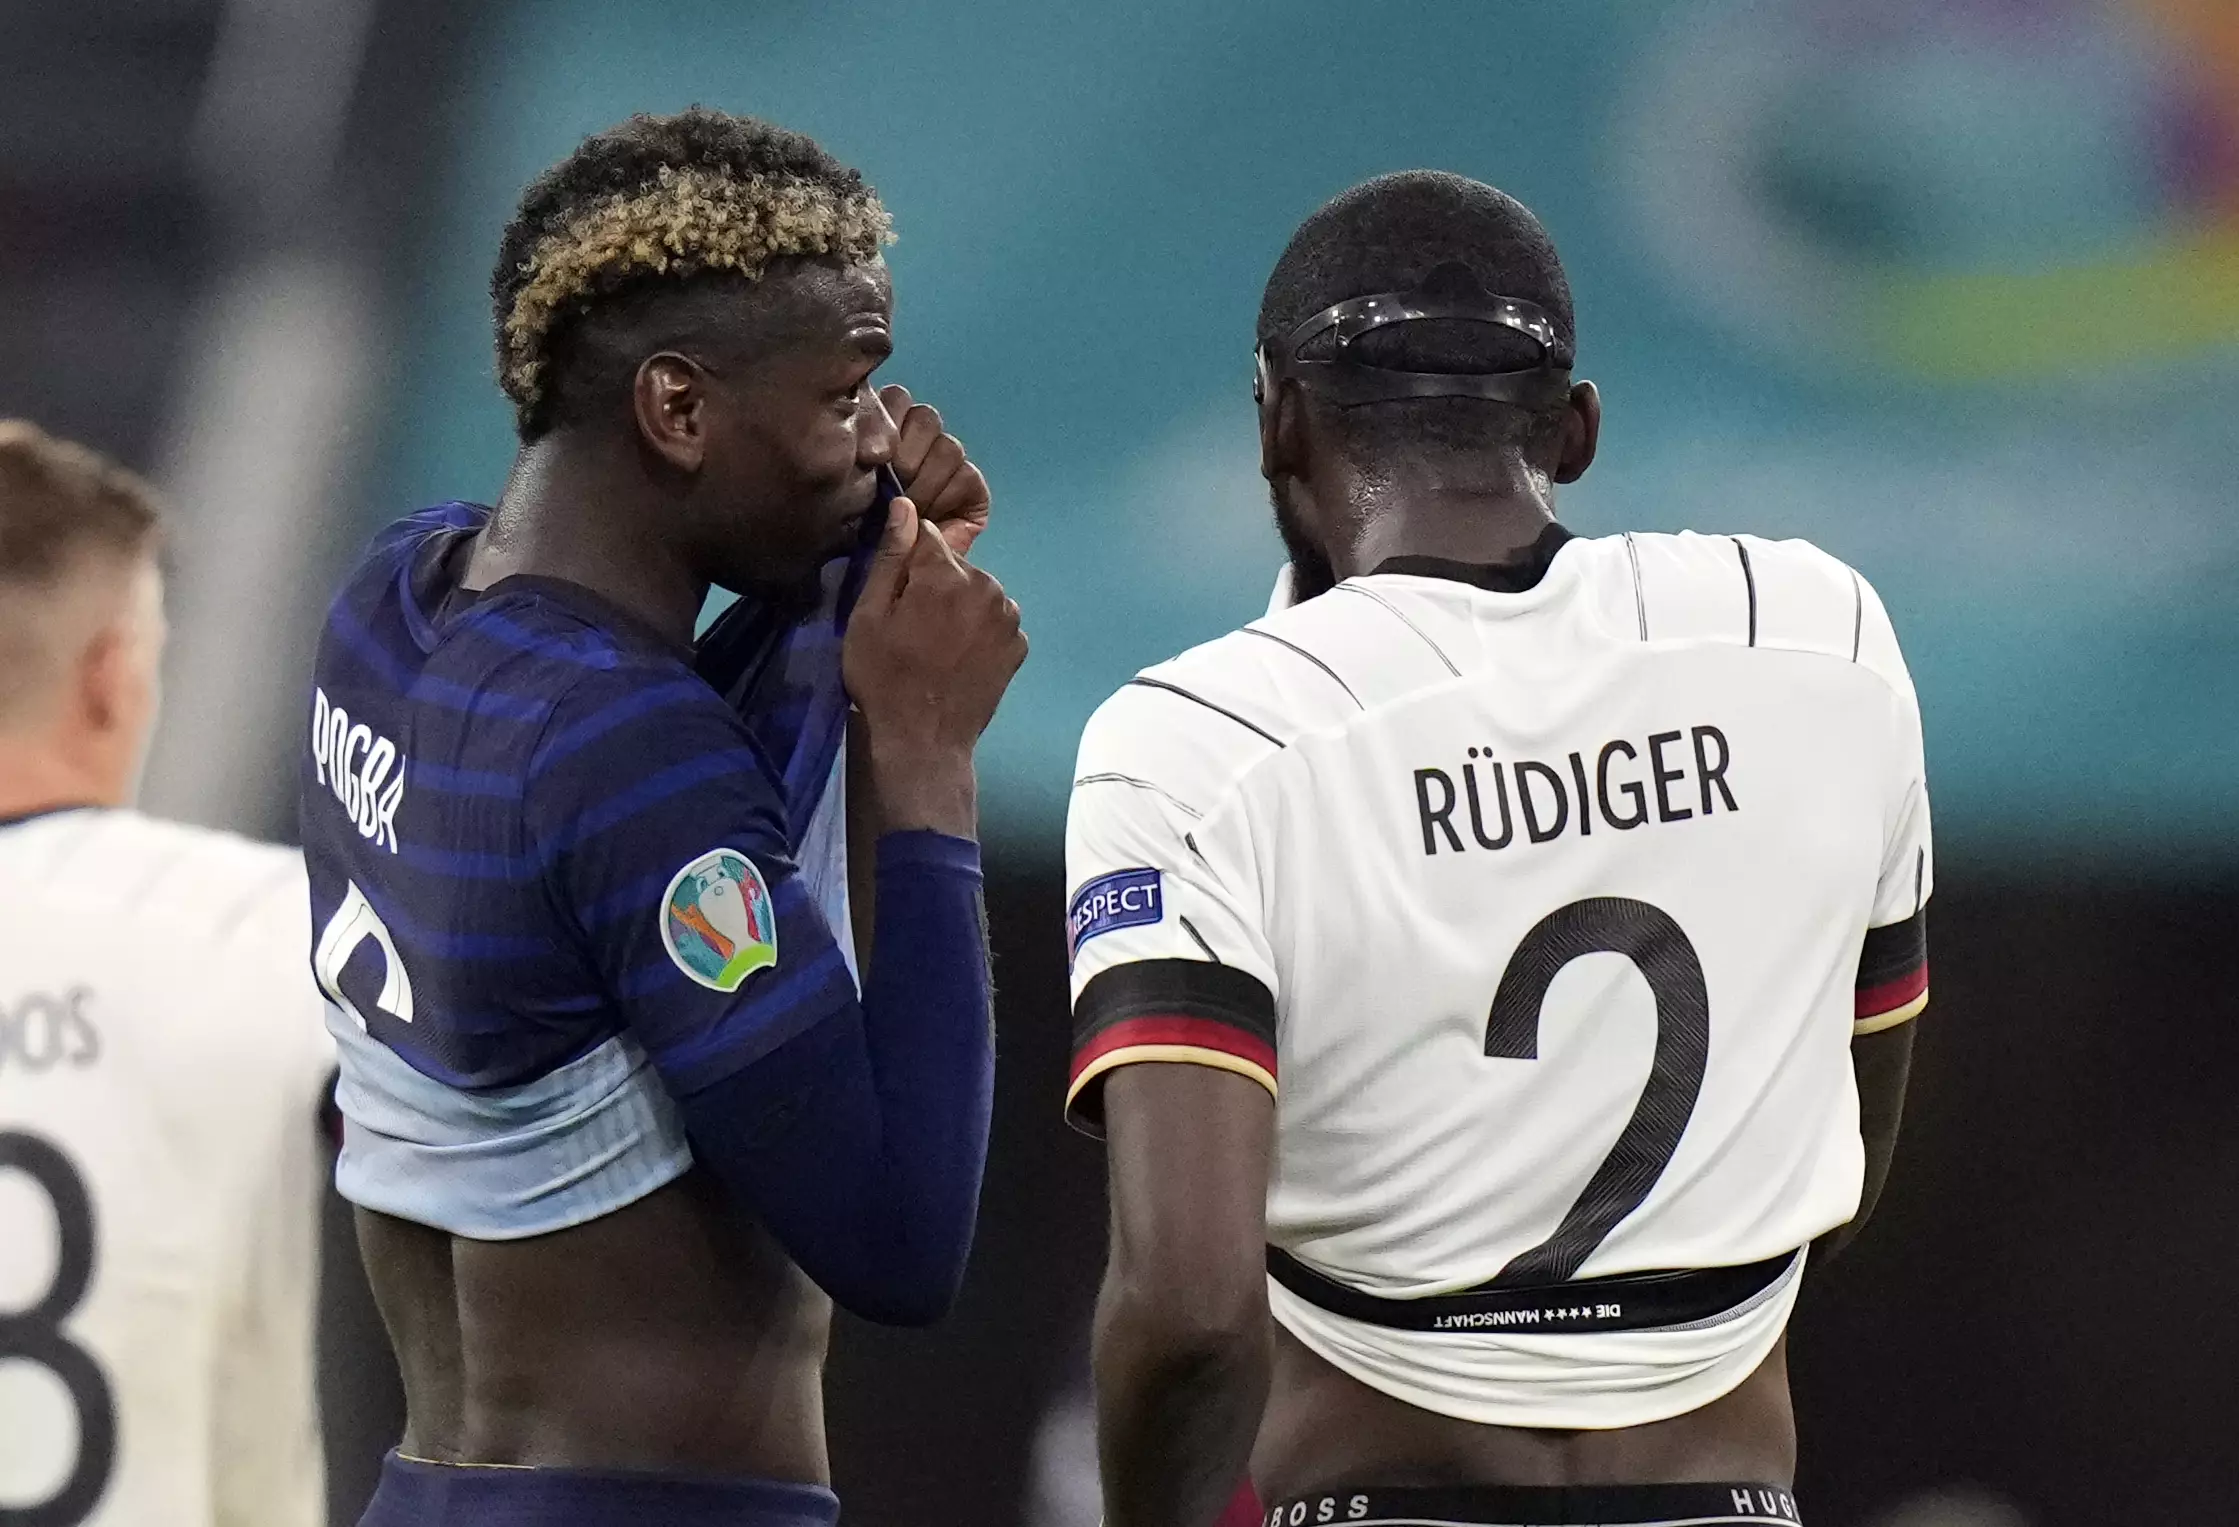 Pogba and Rudiger were clearly on speaking terms at full time. Image: PA Images